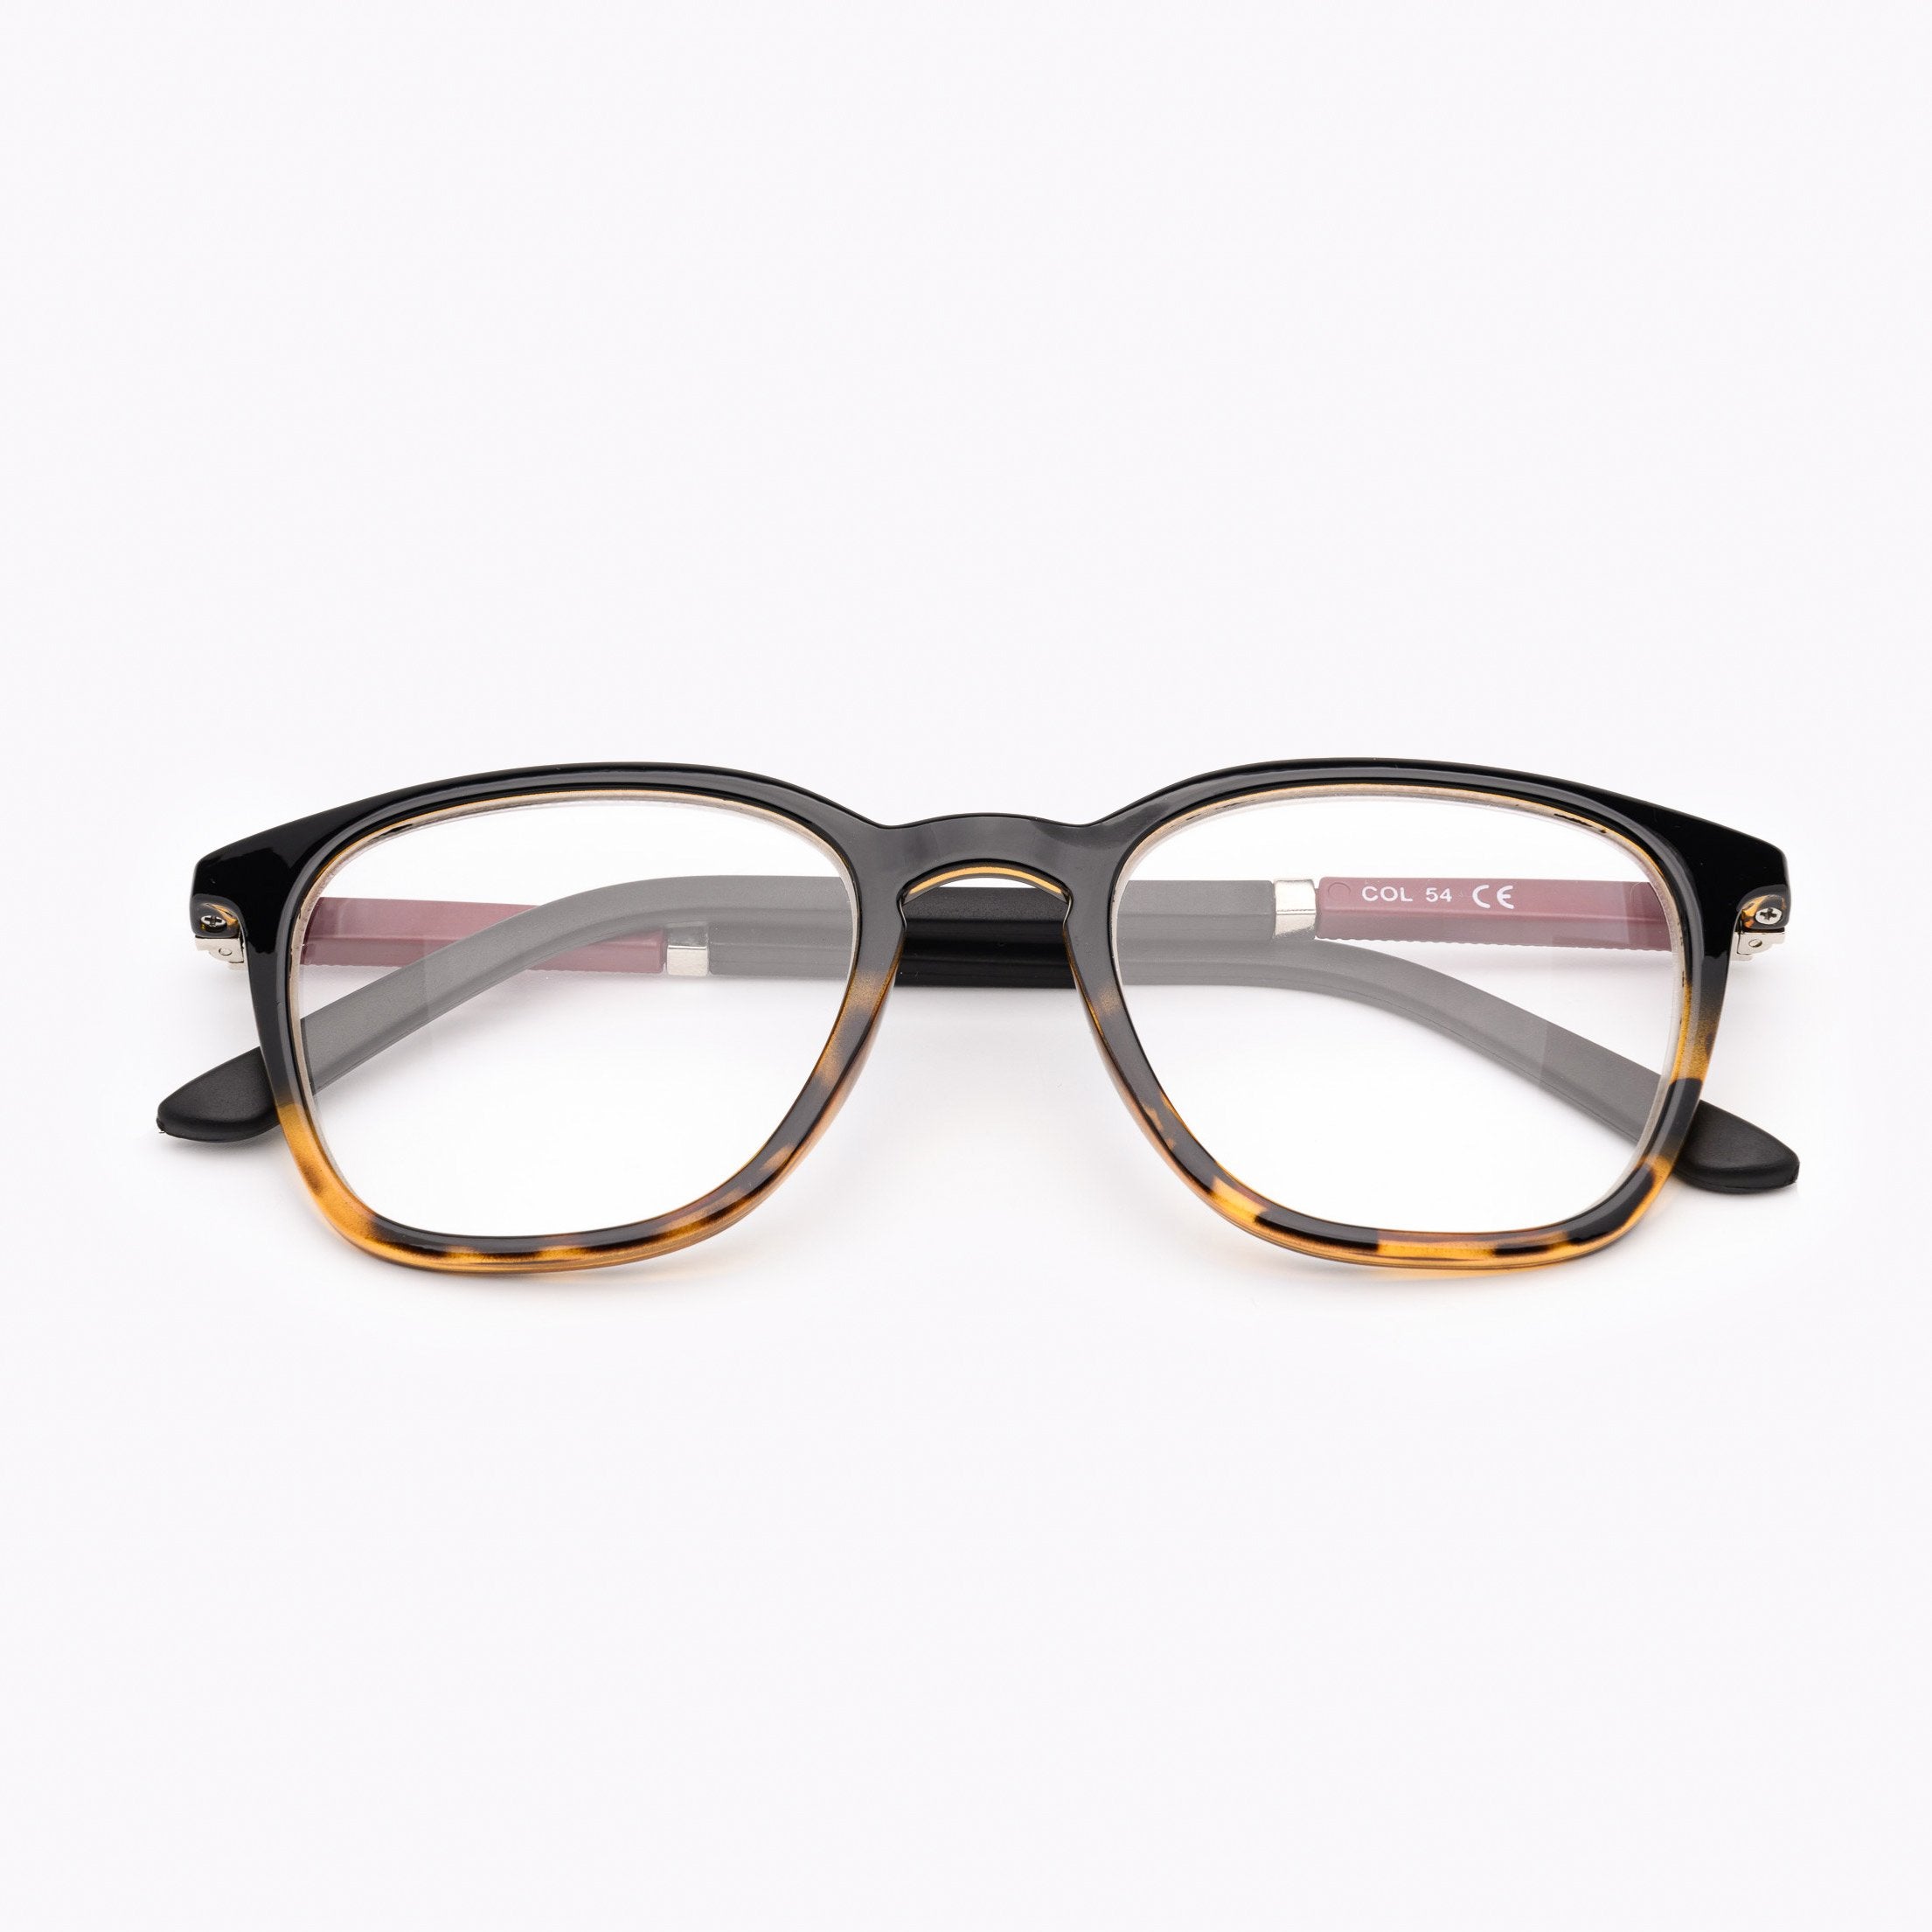 Wayfarer reading glasses scale pattern red temples